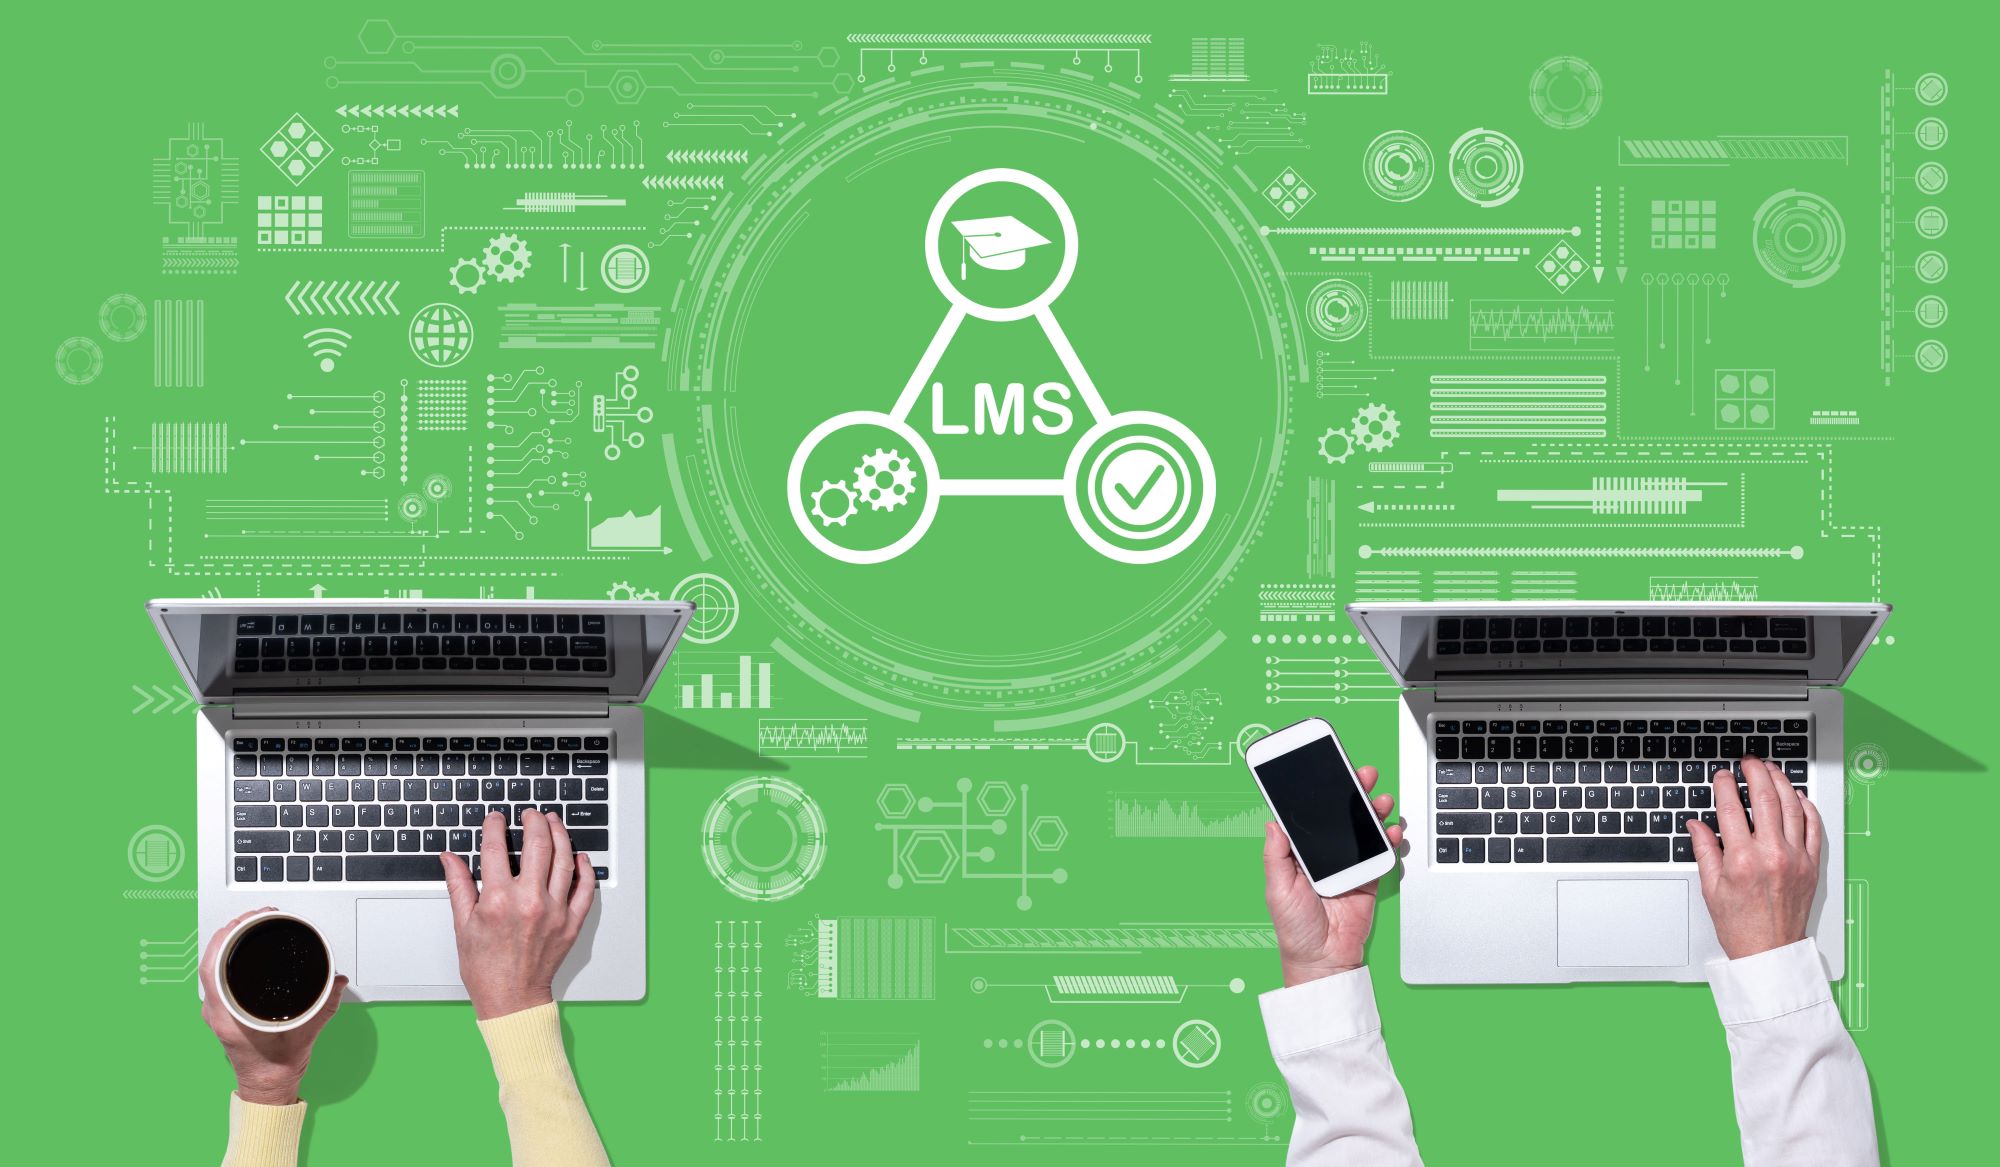 LMS infographic showing 2 images